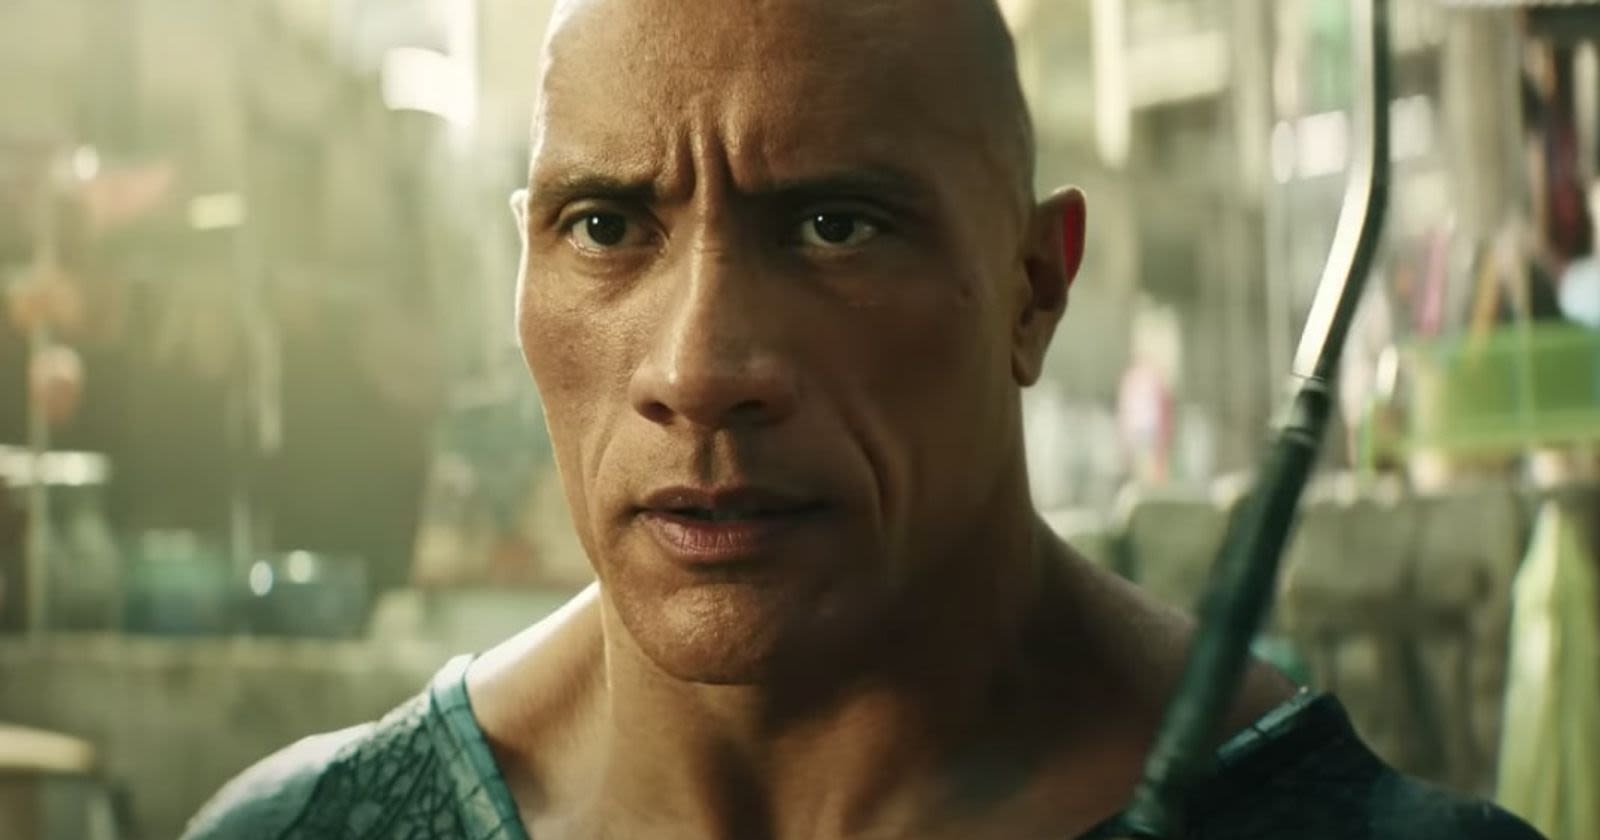 Dwayne The Rock Johnson Reportedly MCU-Bound to Play Surprising X-Men Character